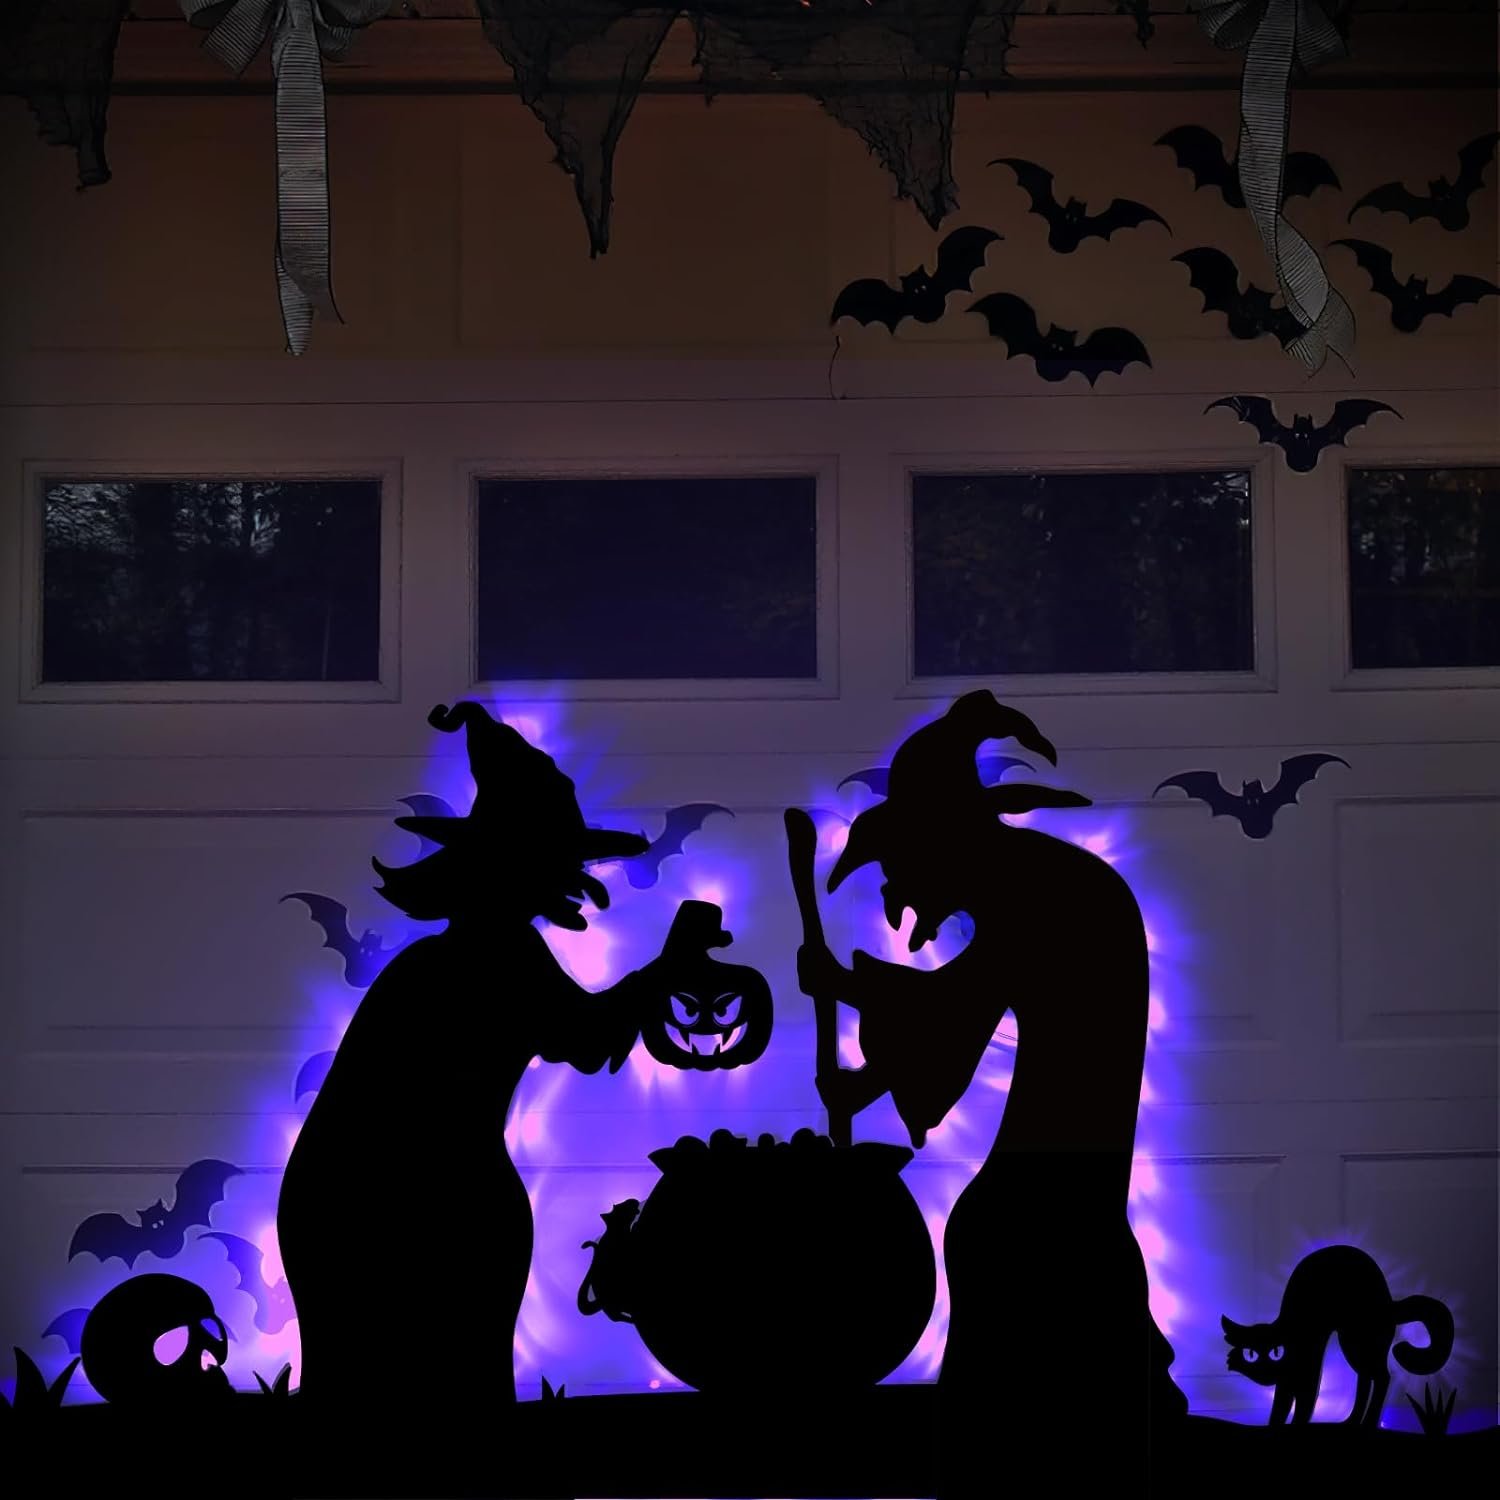 Halloween Witch Decorations Outdoor - 2 Large Black Witches with Cauldron, Scary Halloween Silhouette with Lights for Outside Halloween Garage Door Wall Yard Decor